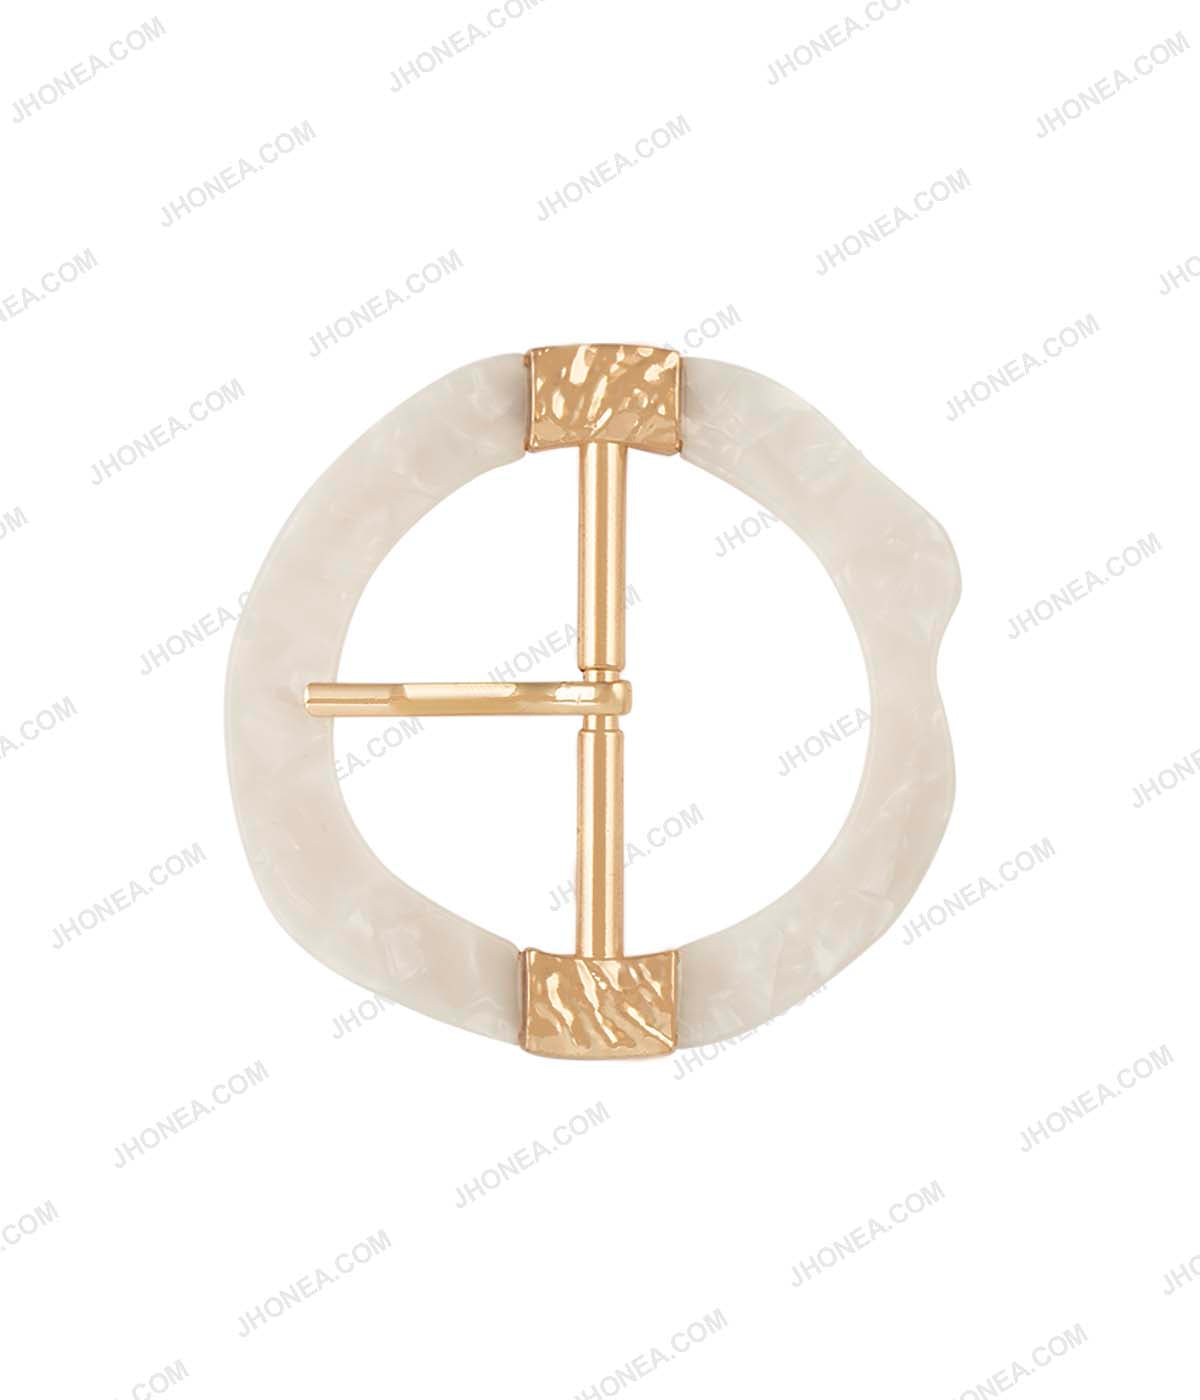 Glistening White Uneven Frame with Shiny Gold Center Bar Prong Buckle